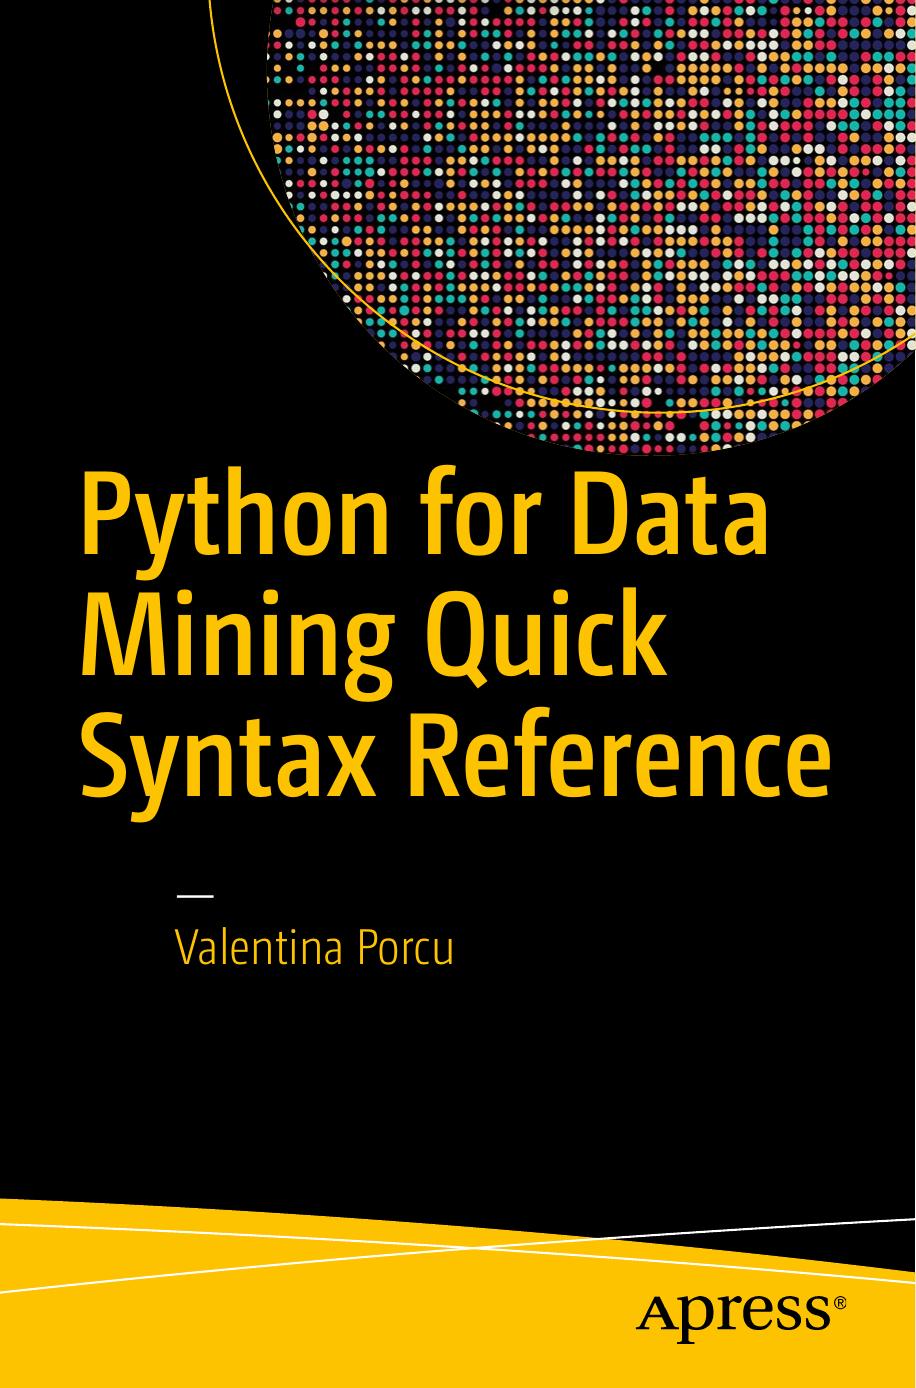 Python for Data Mining Quick Syntax 2019